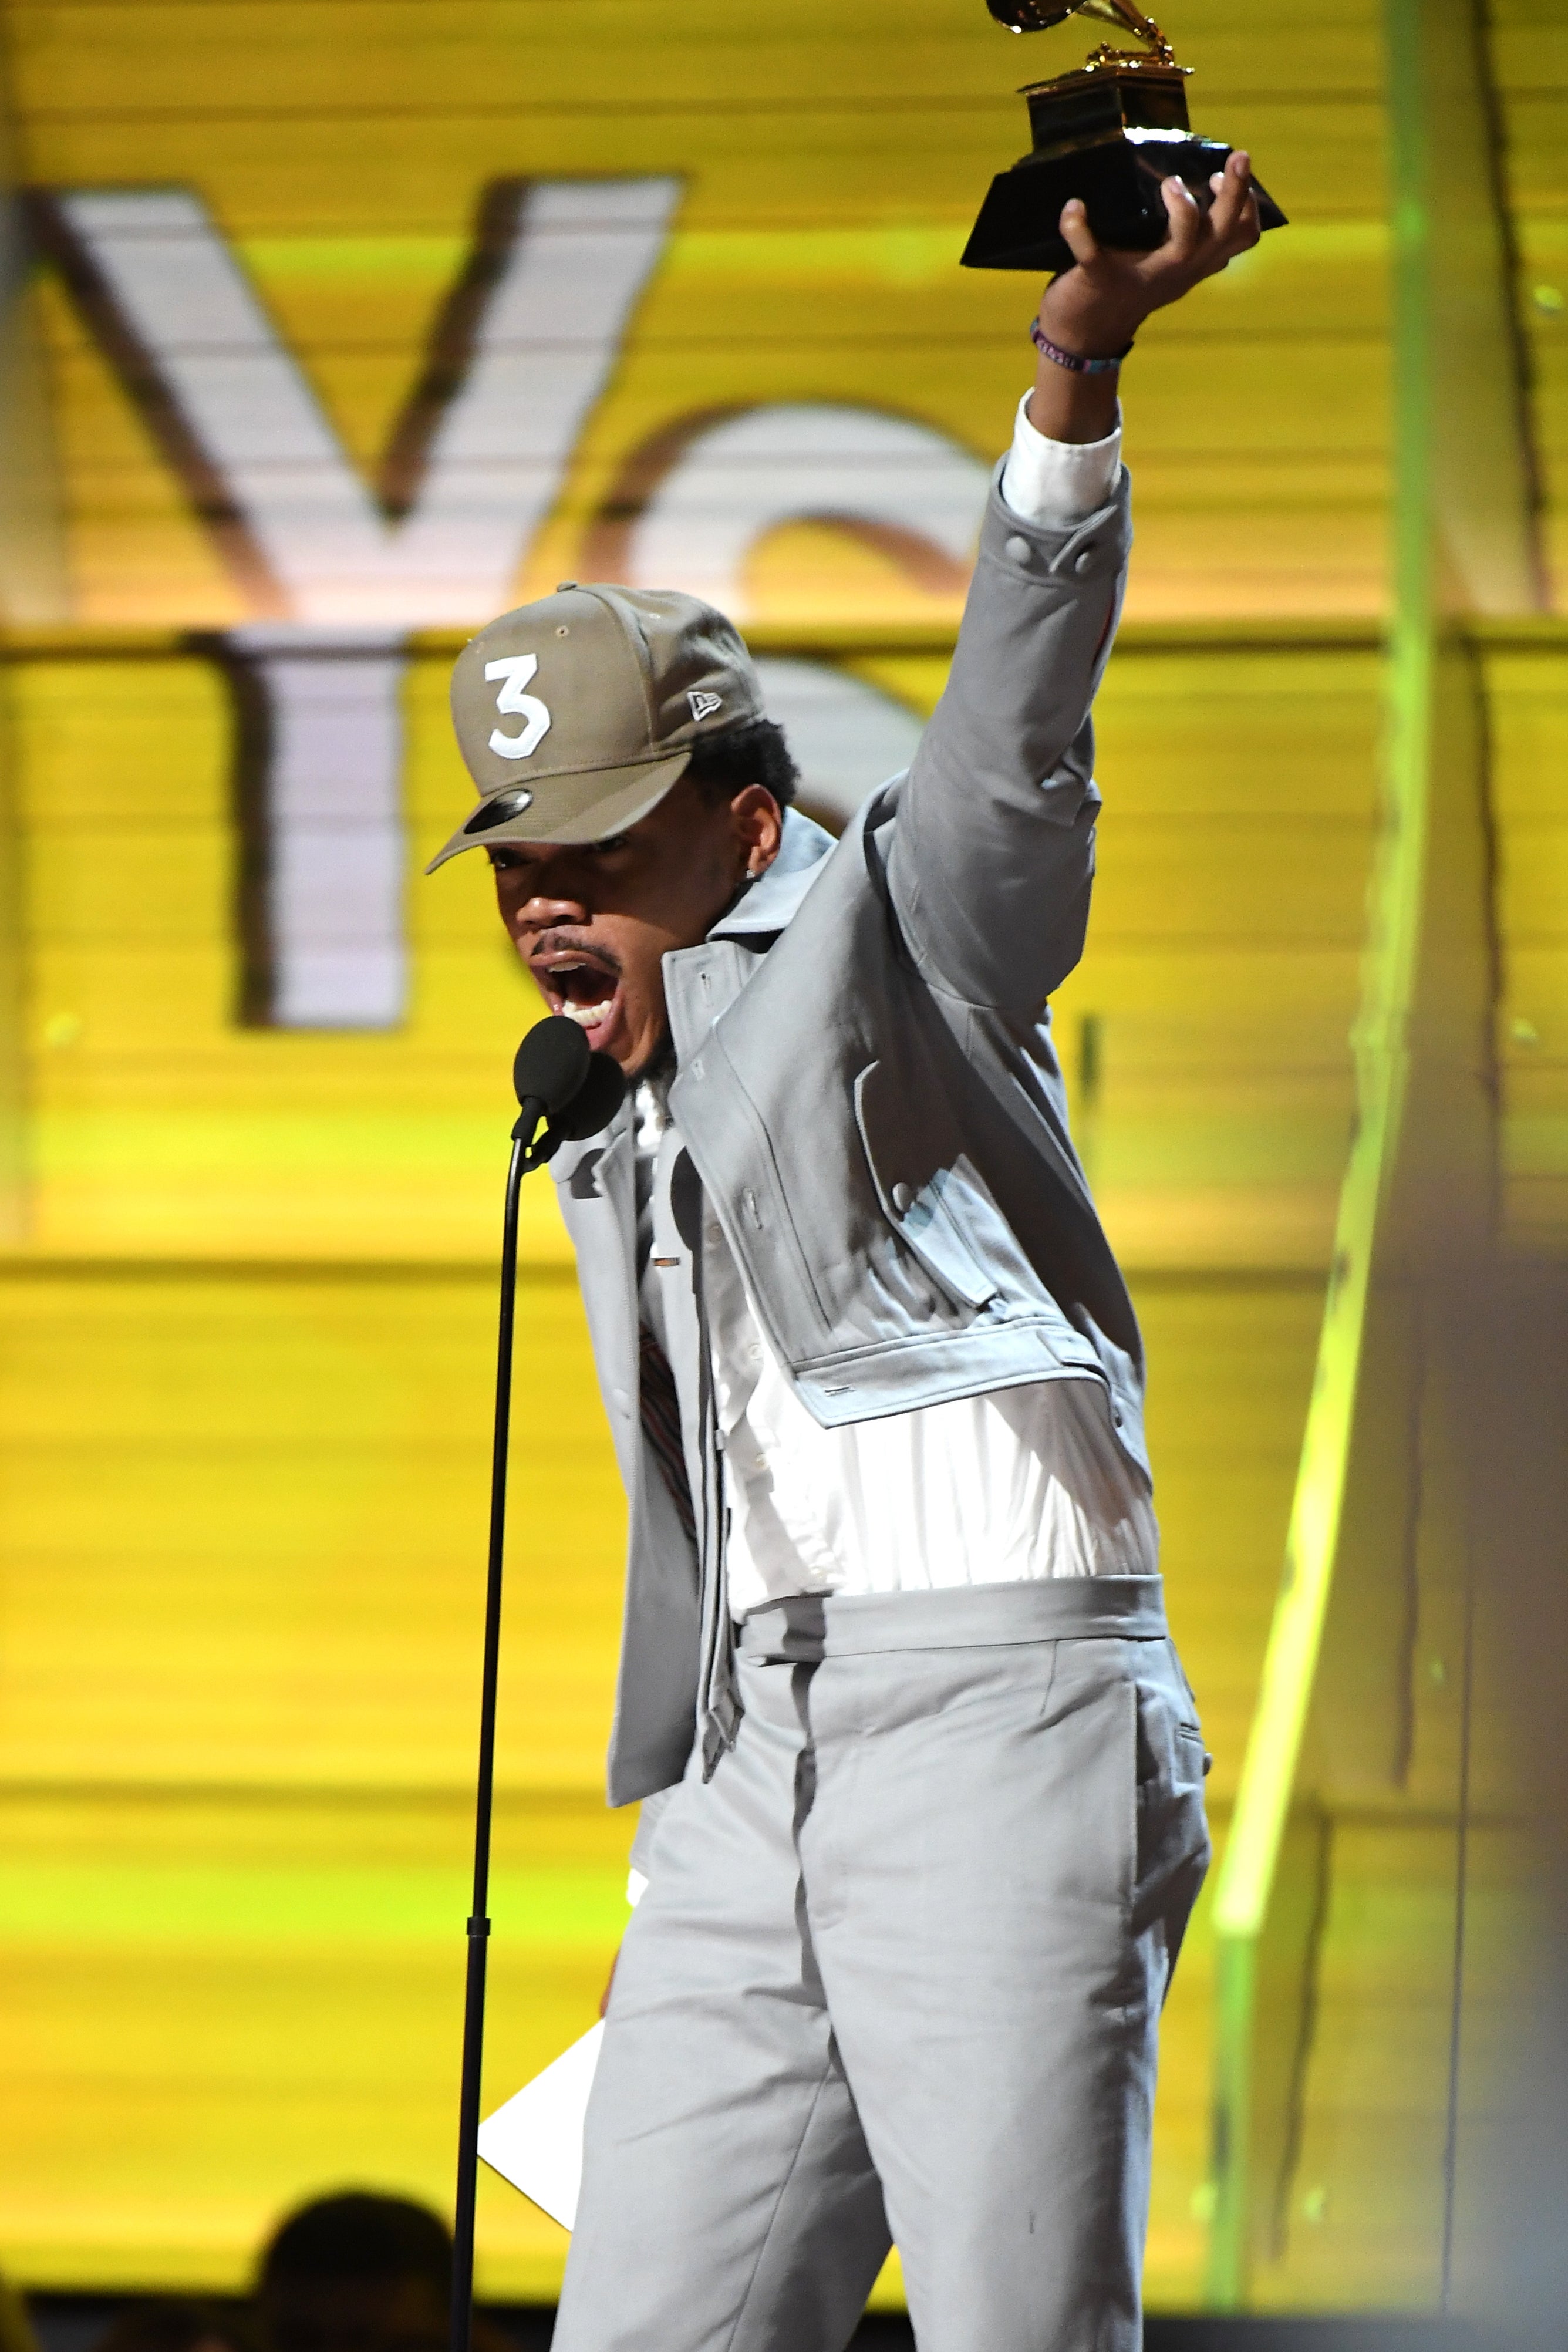 Chance The Rapper Takes The Stage At The 2017 Grammys And Absolutely Kills It
